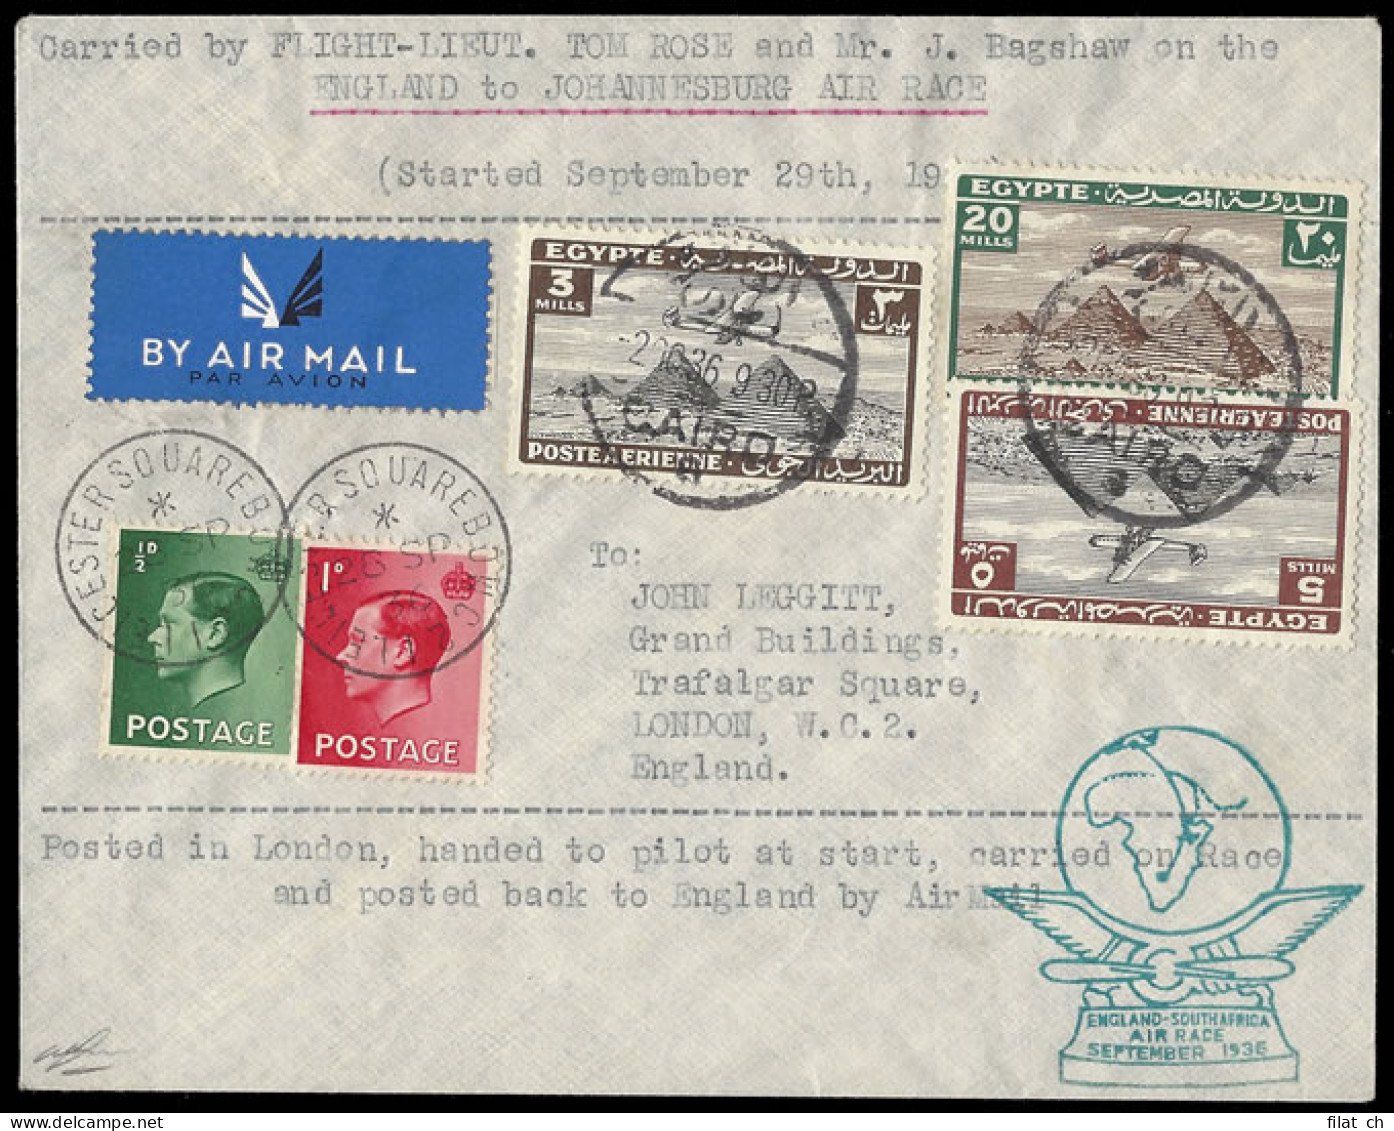 South Africa 1936 Schlesinger Air Race Rose & Bagshaw Signed - Airmail